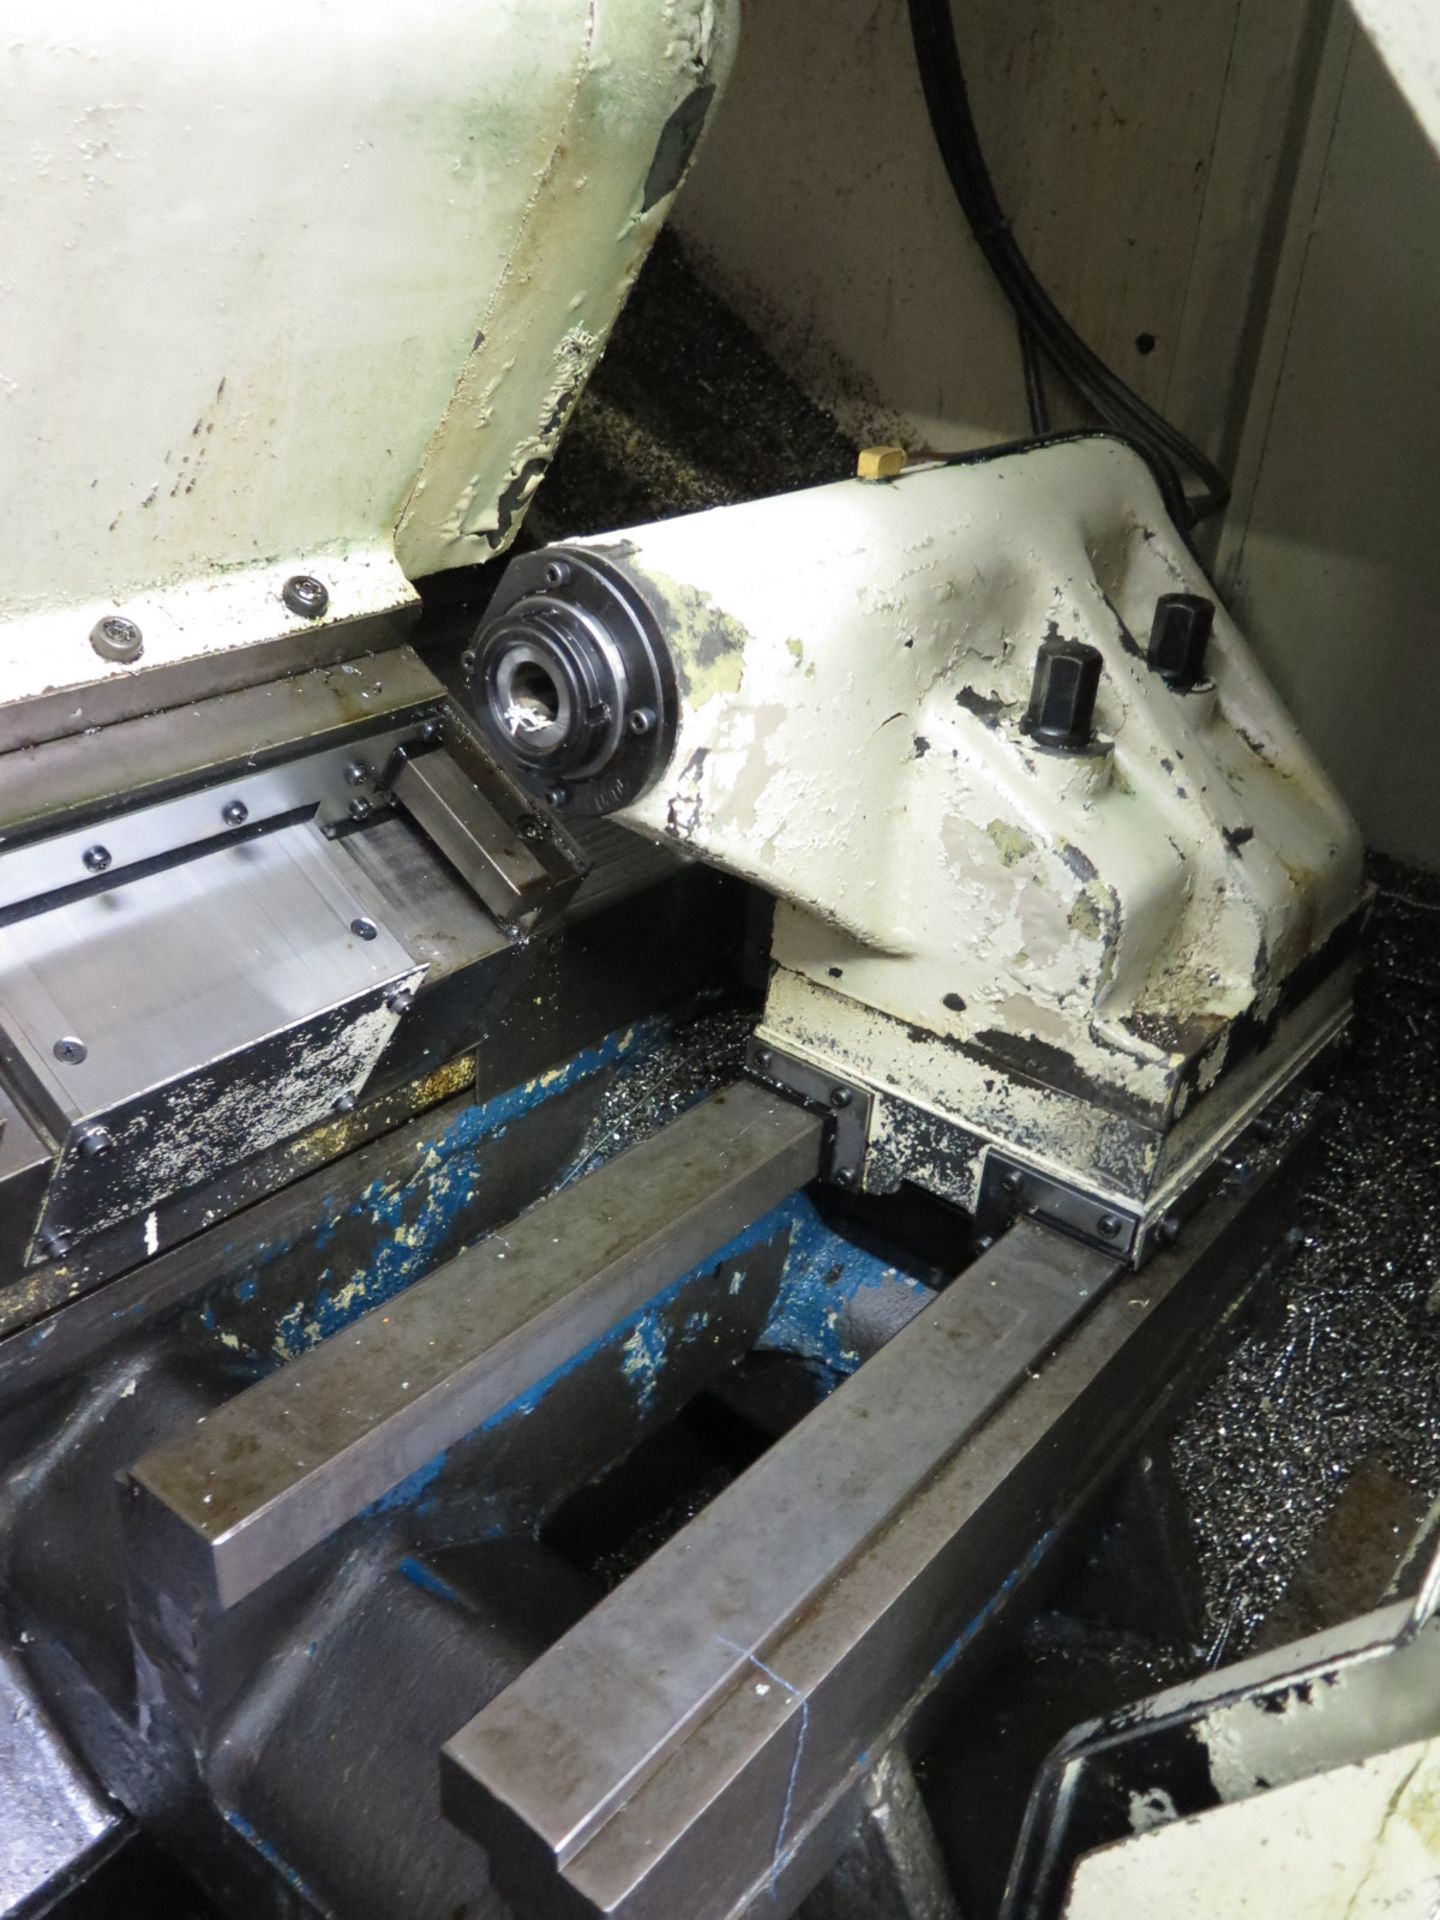 1995 Daewoo PUMA-6S CNC Turning Center s/n PM6S-0392 w/ Fanuc Series 0-T Controls, 12-Station - Image 4 of 7